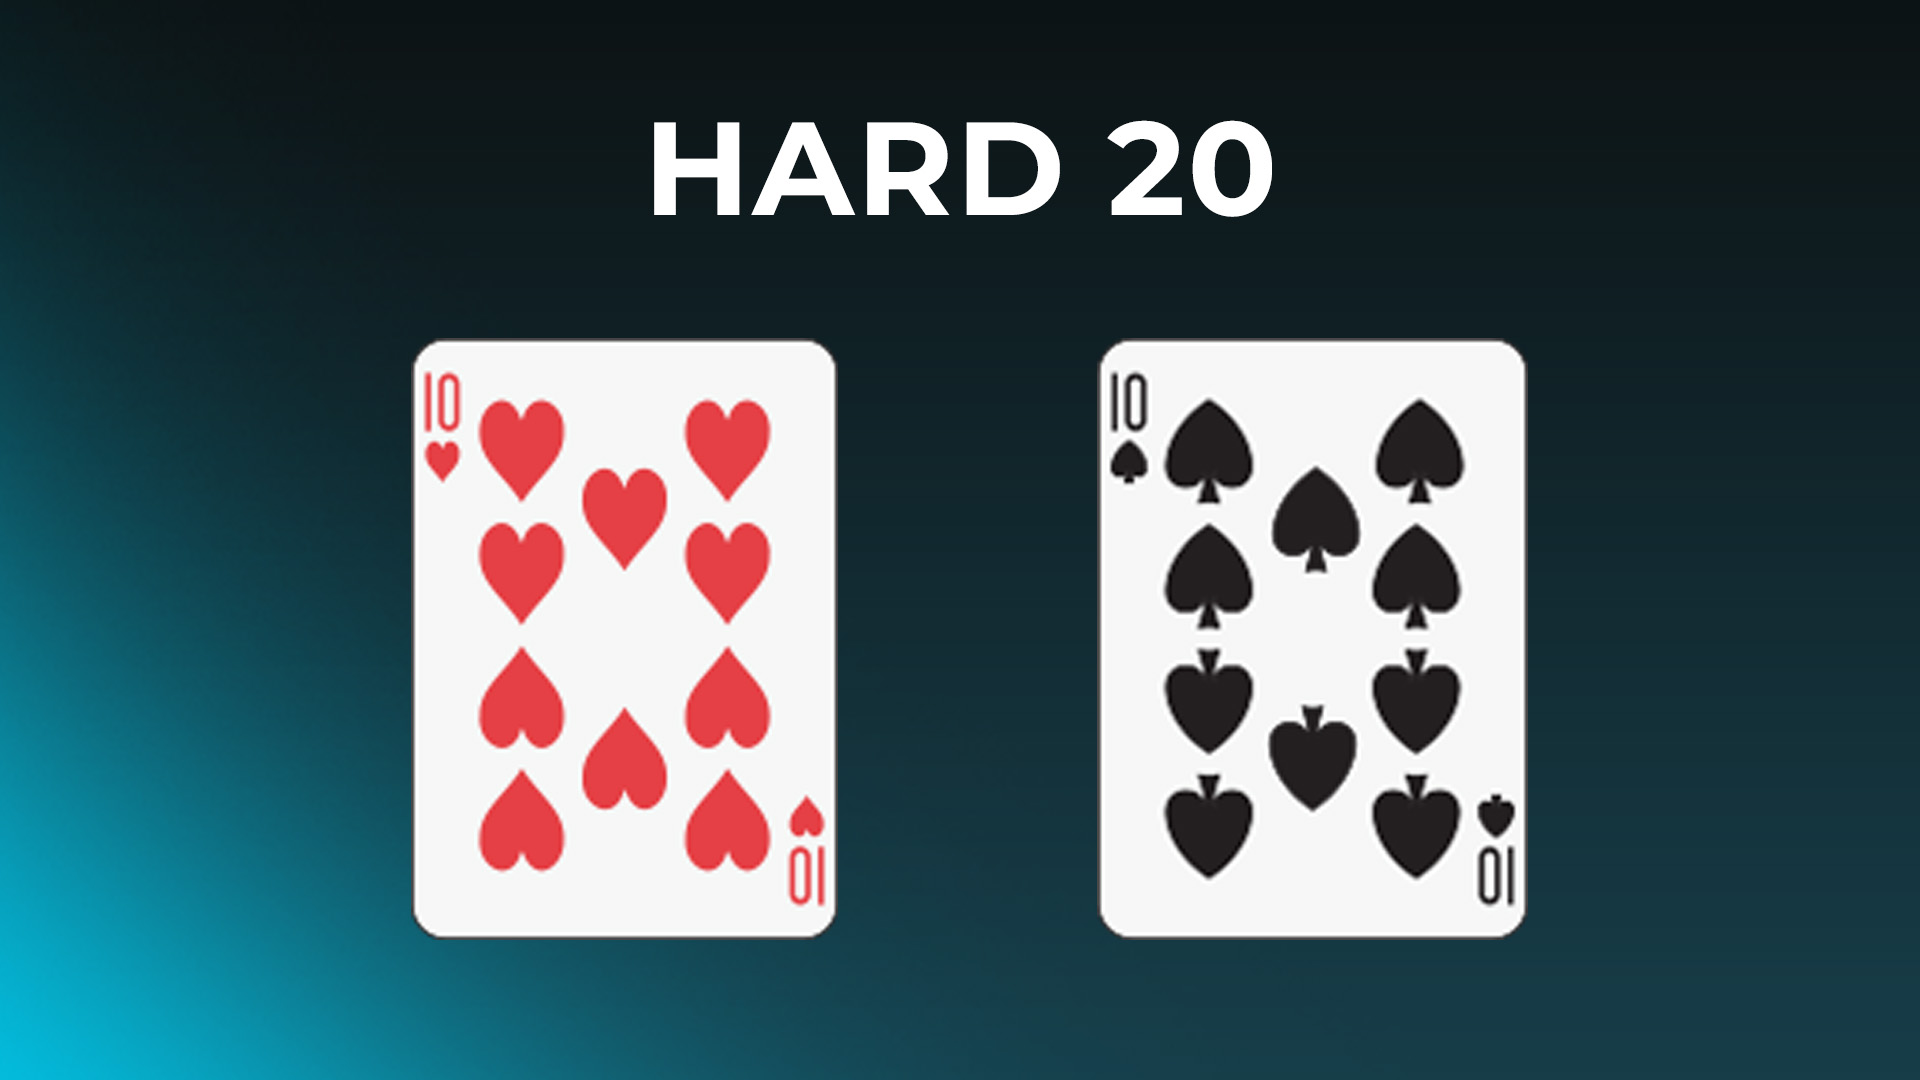 Example of a hard 20 hand